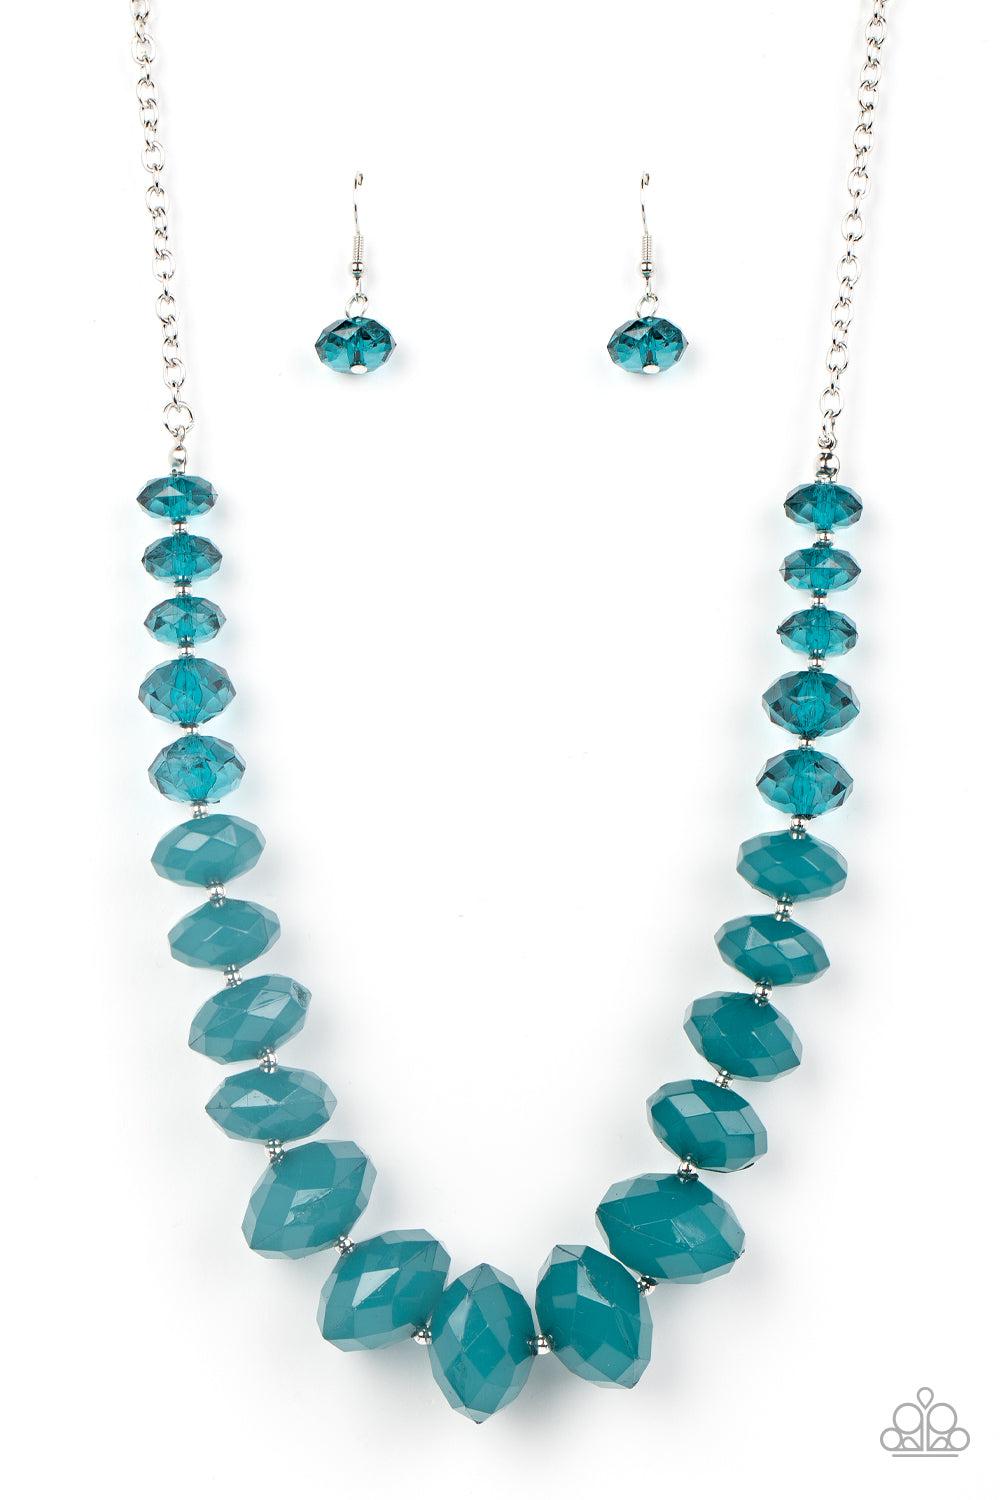 Happy-GLOW-Lucky Blue Necklace - Paparazzi Accessories- lightbox - CarasShop.com - $5 Jewelry by Cara Jewels